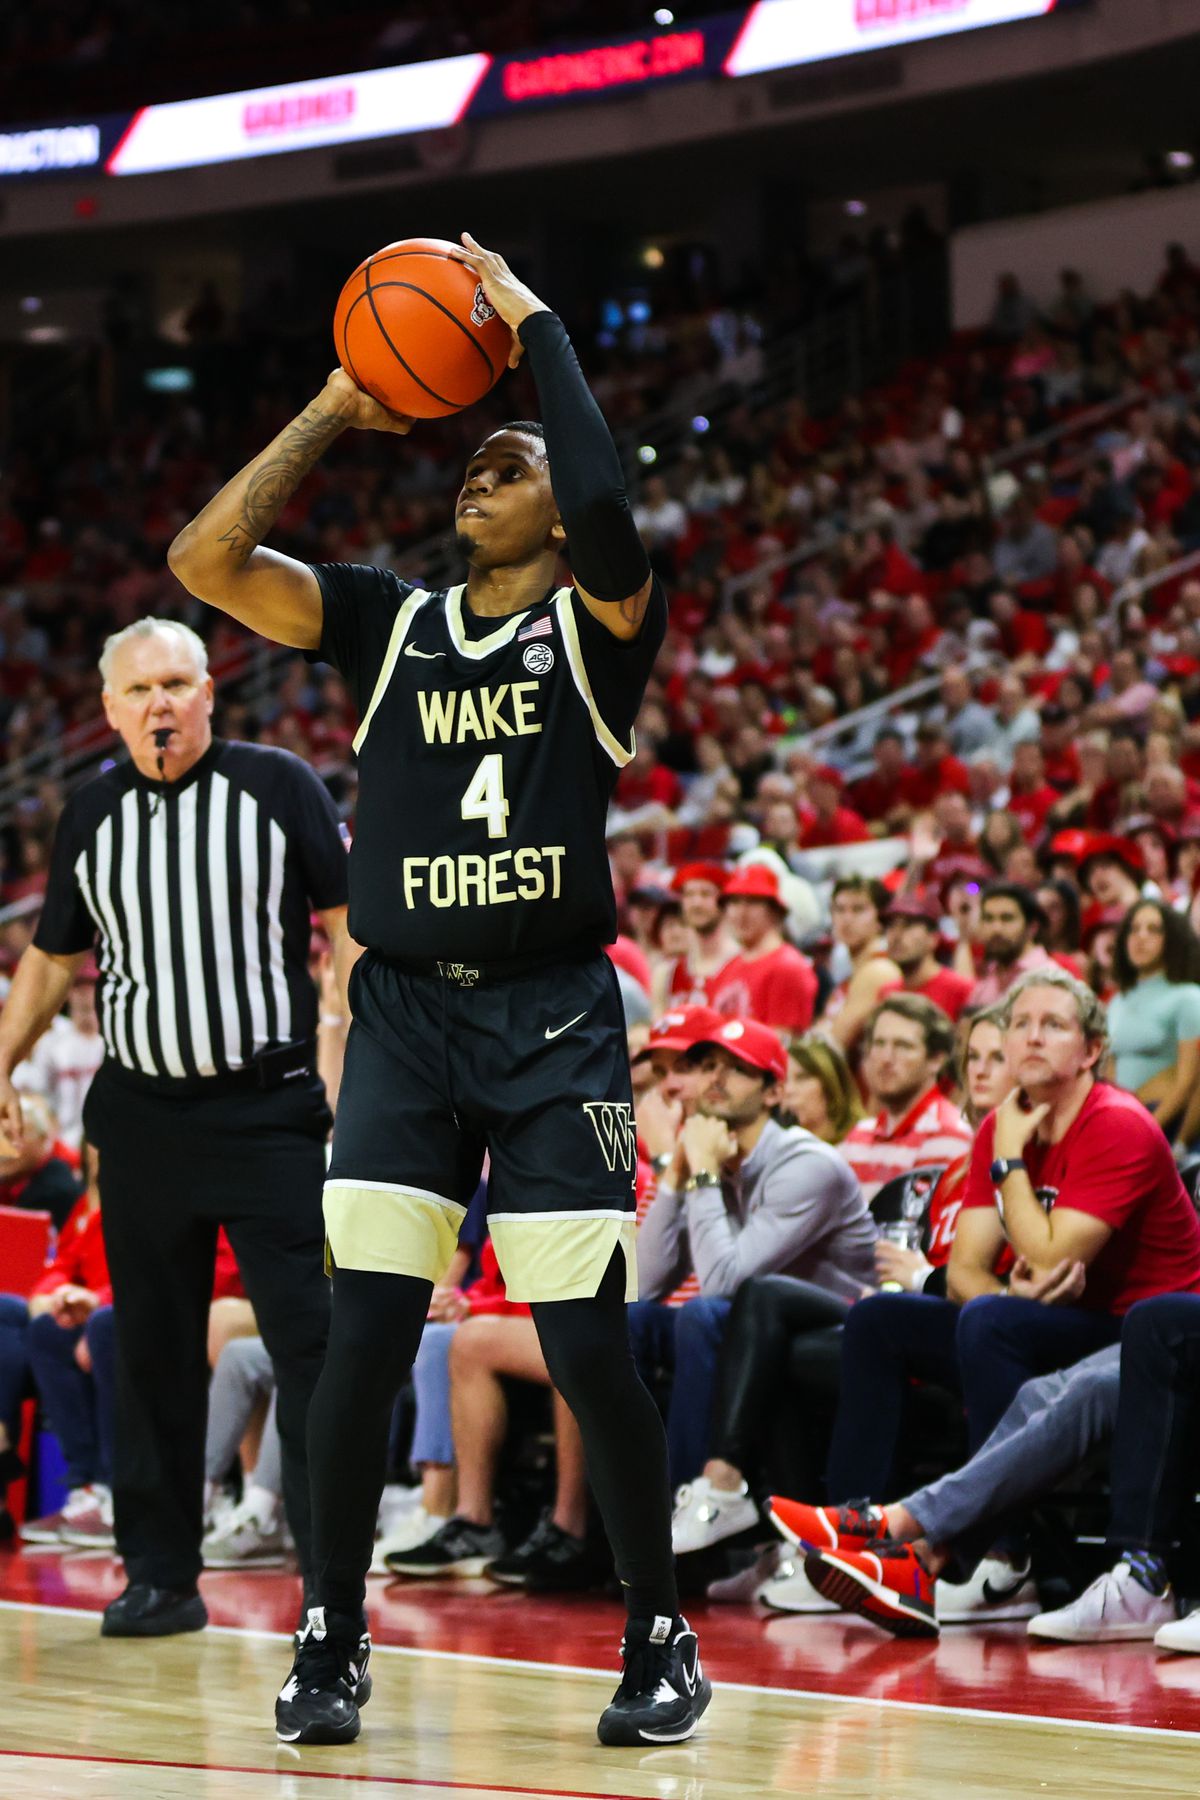 NCAA Basketball: Wake Forest at N.C. State